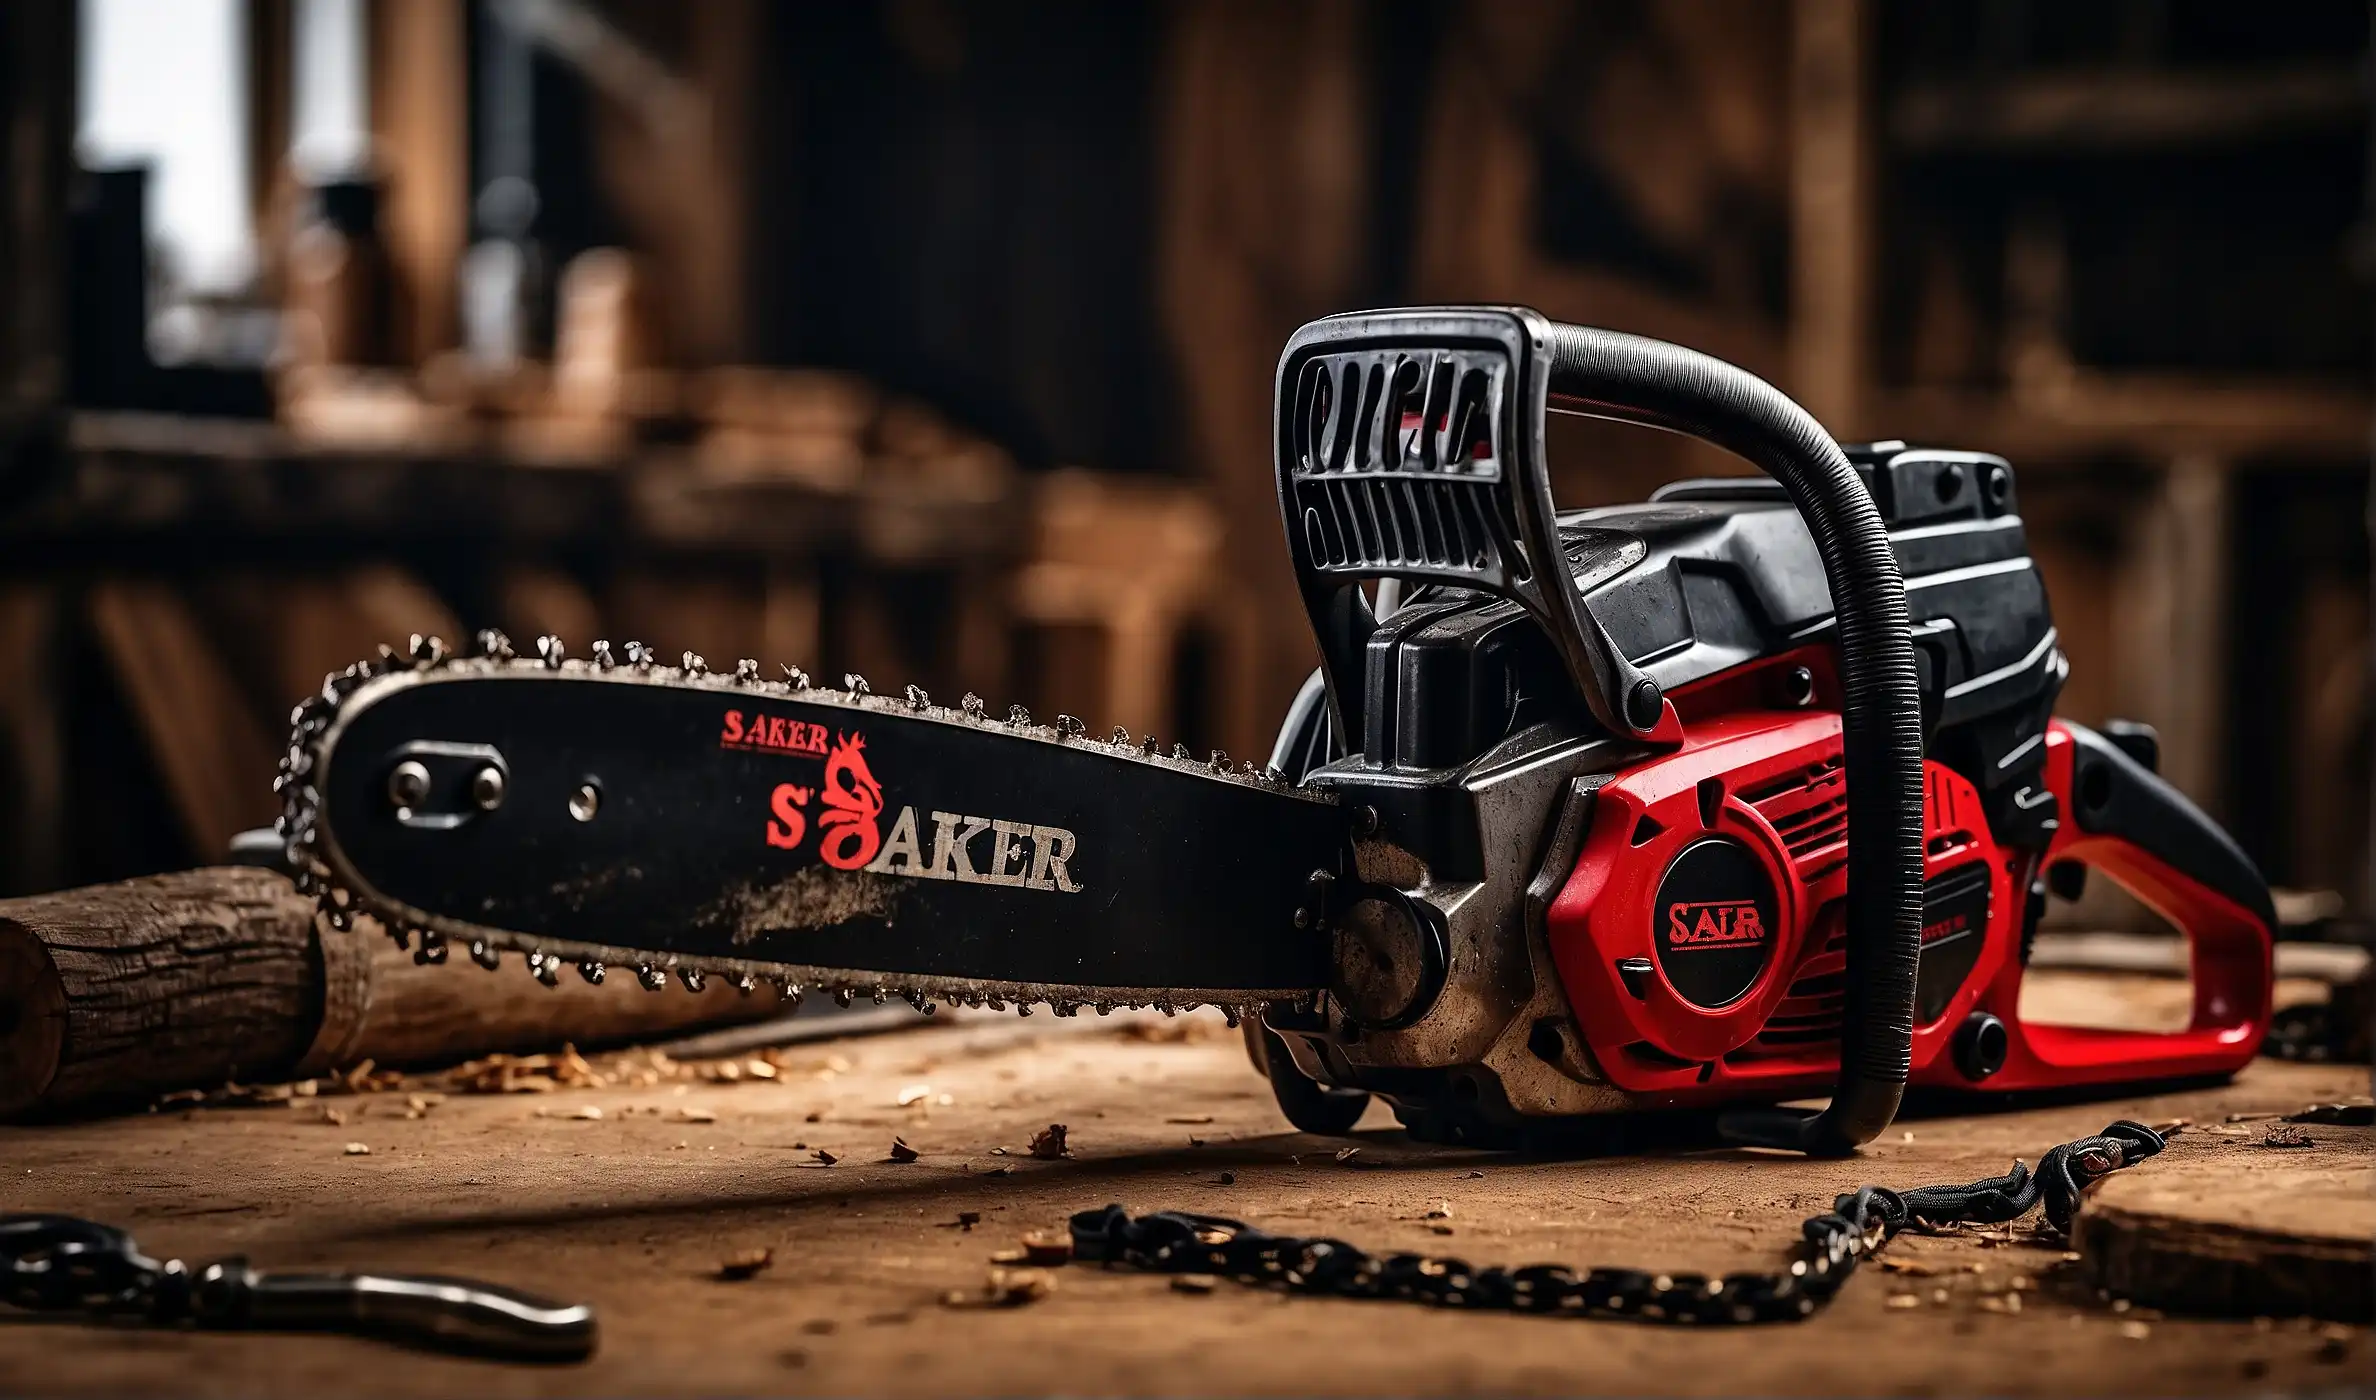 Saker mini chainsaw made in China